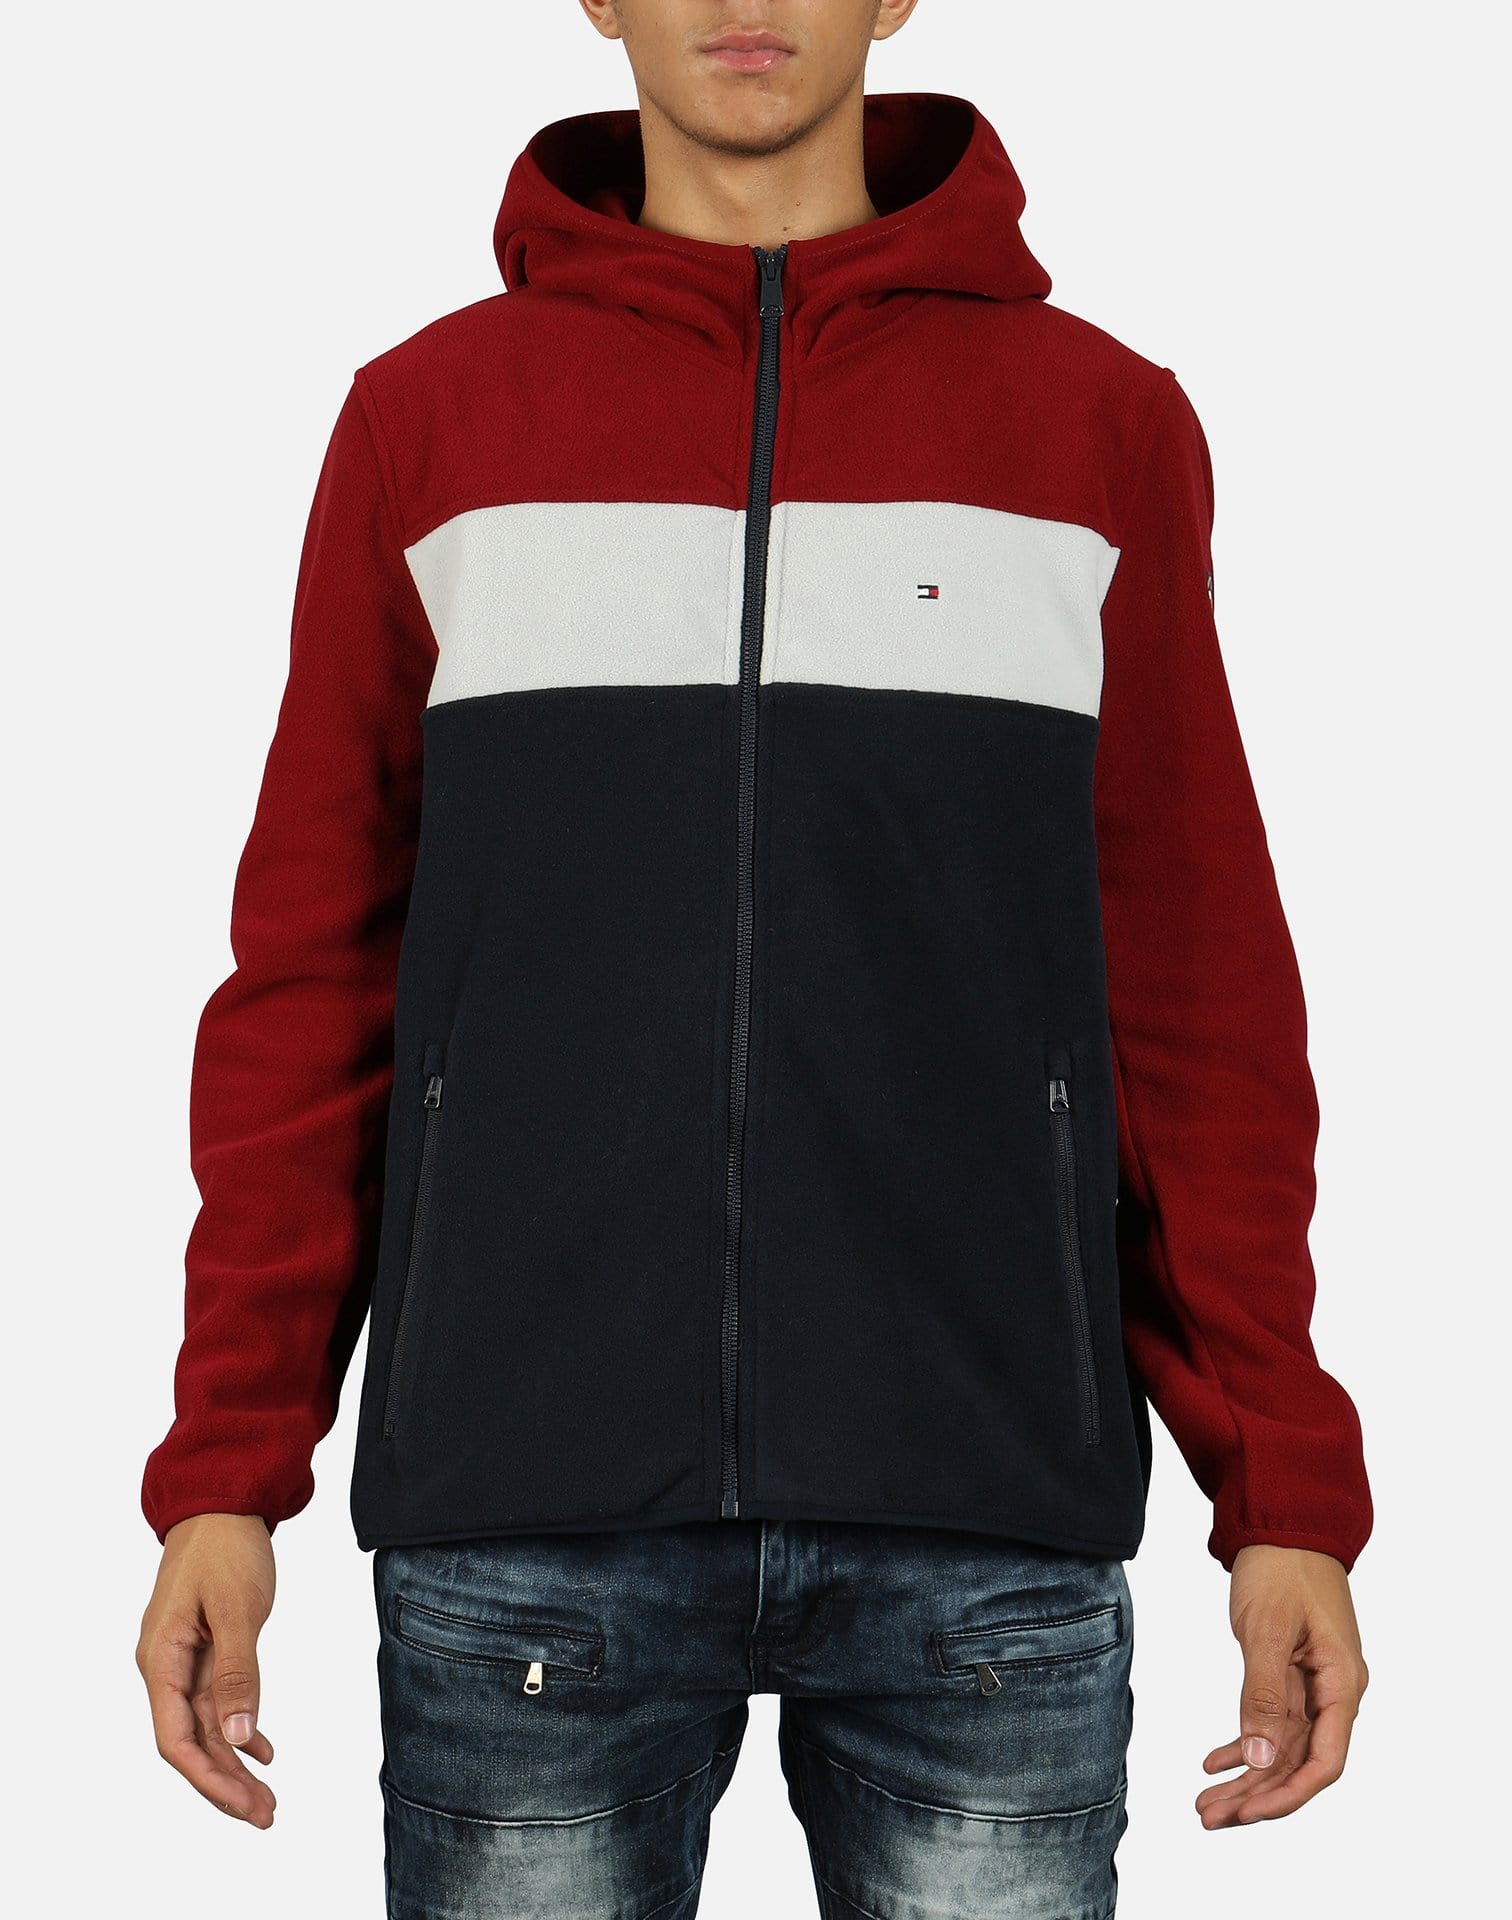 Pre-owned Supreme S Logo Colorblocked Hooded Sweatshirt Red